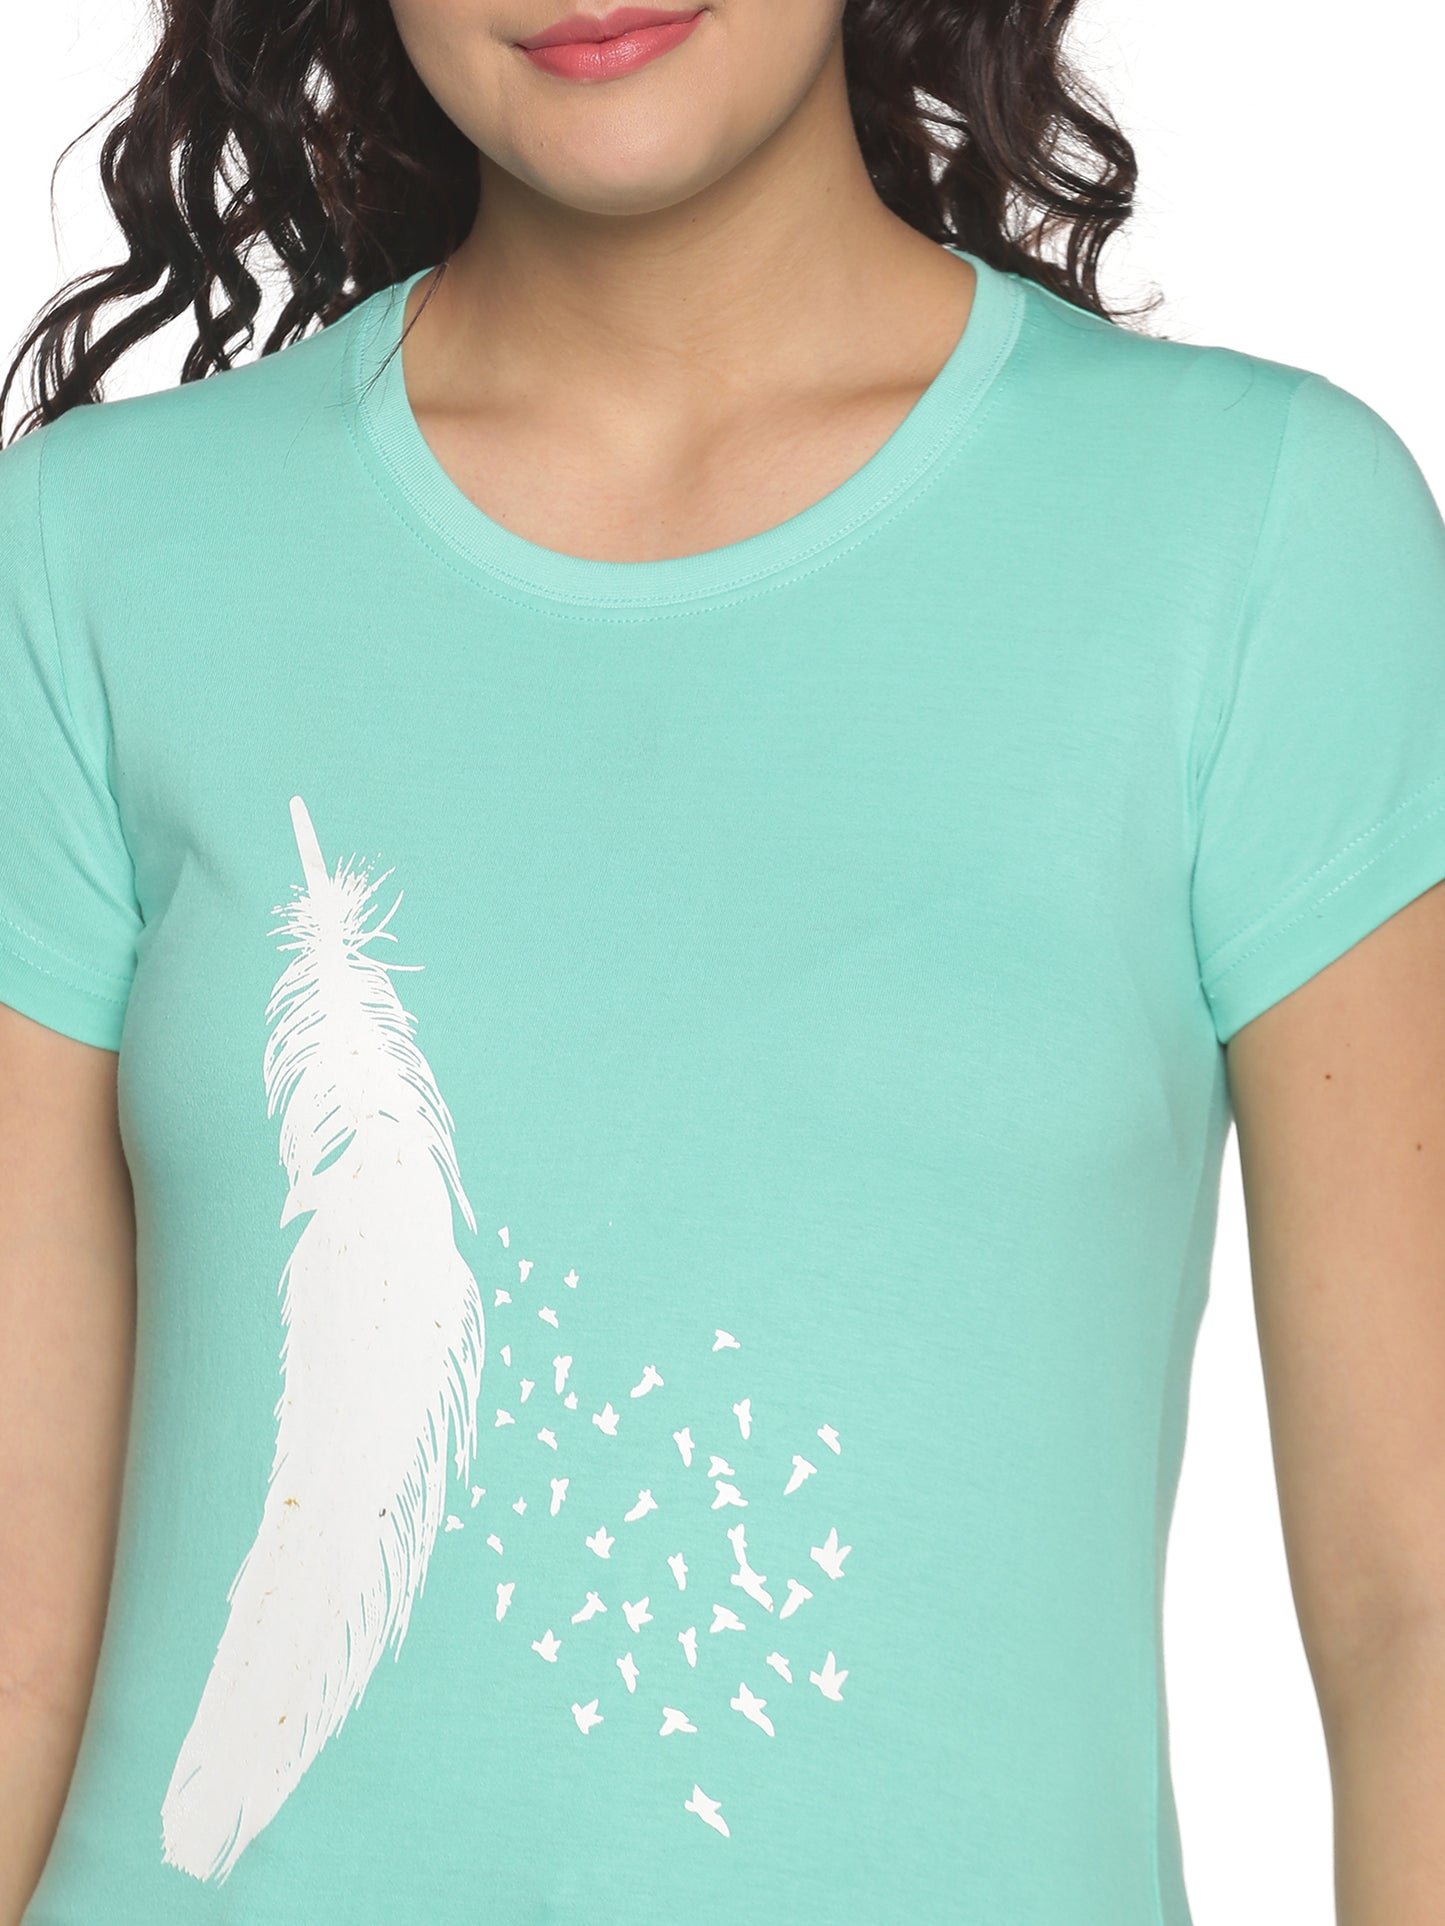 Women's Printed T-shirt(Fether)